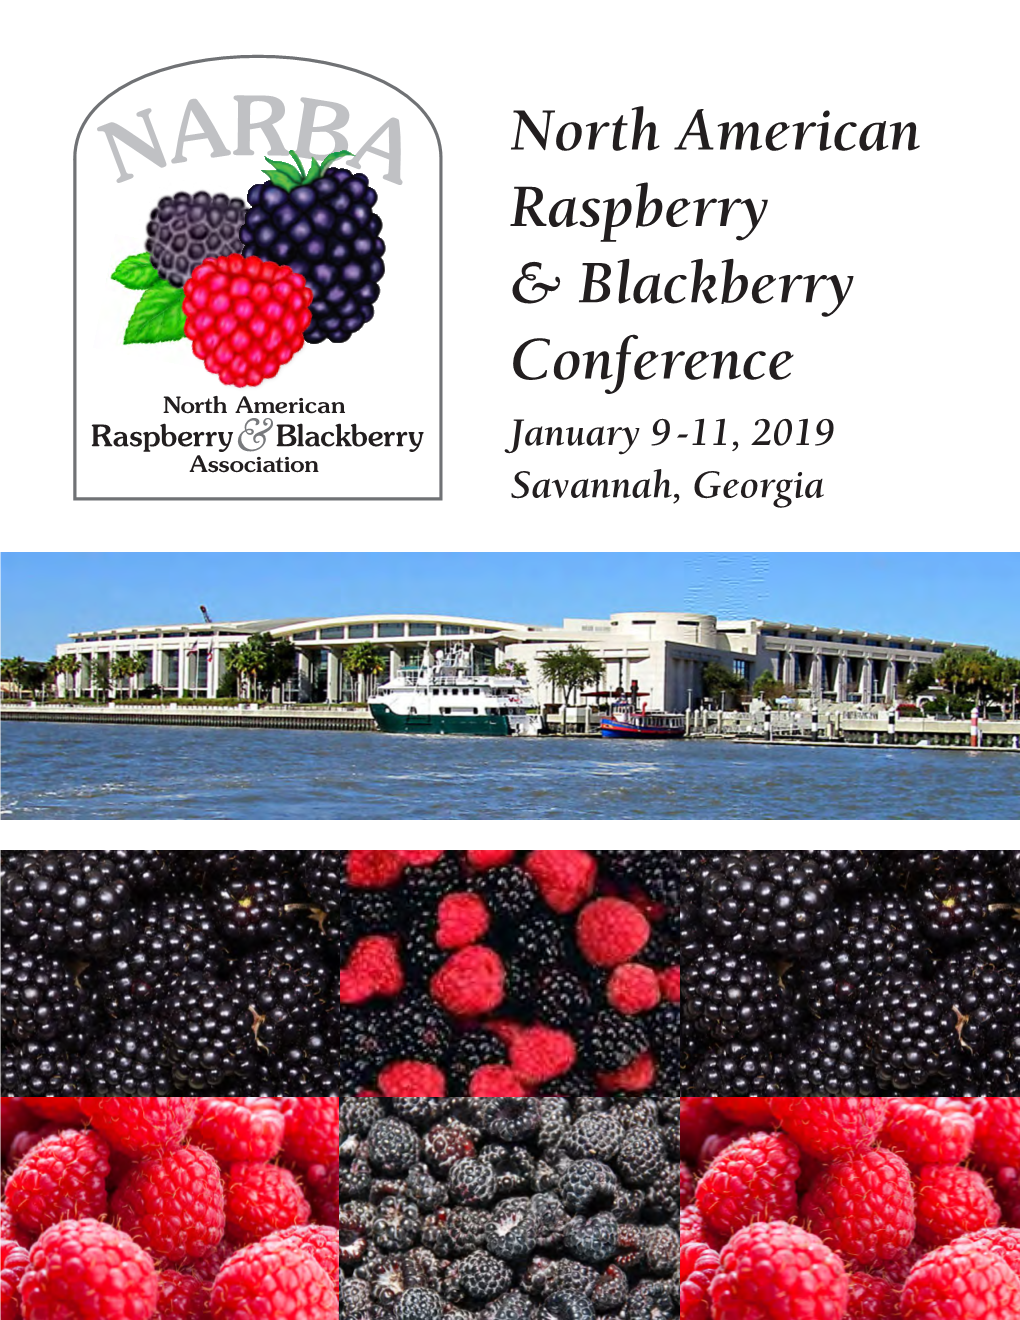 North American Raspberry & Blackberry Conference